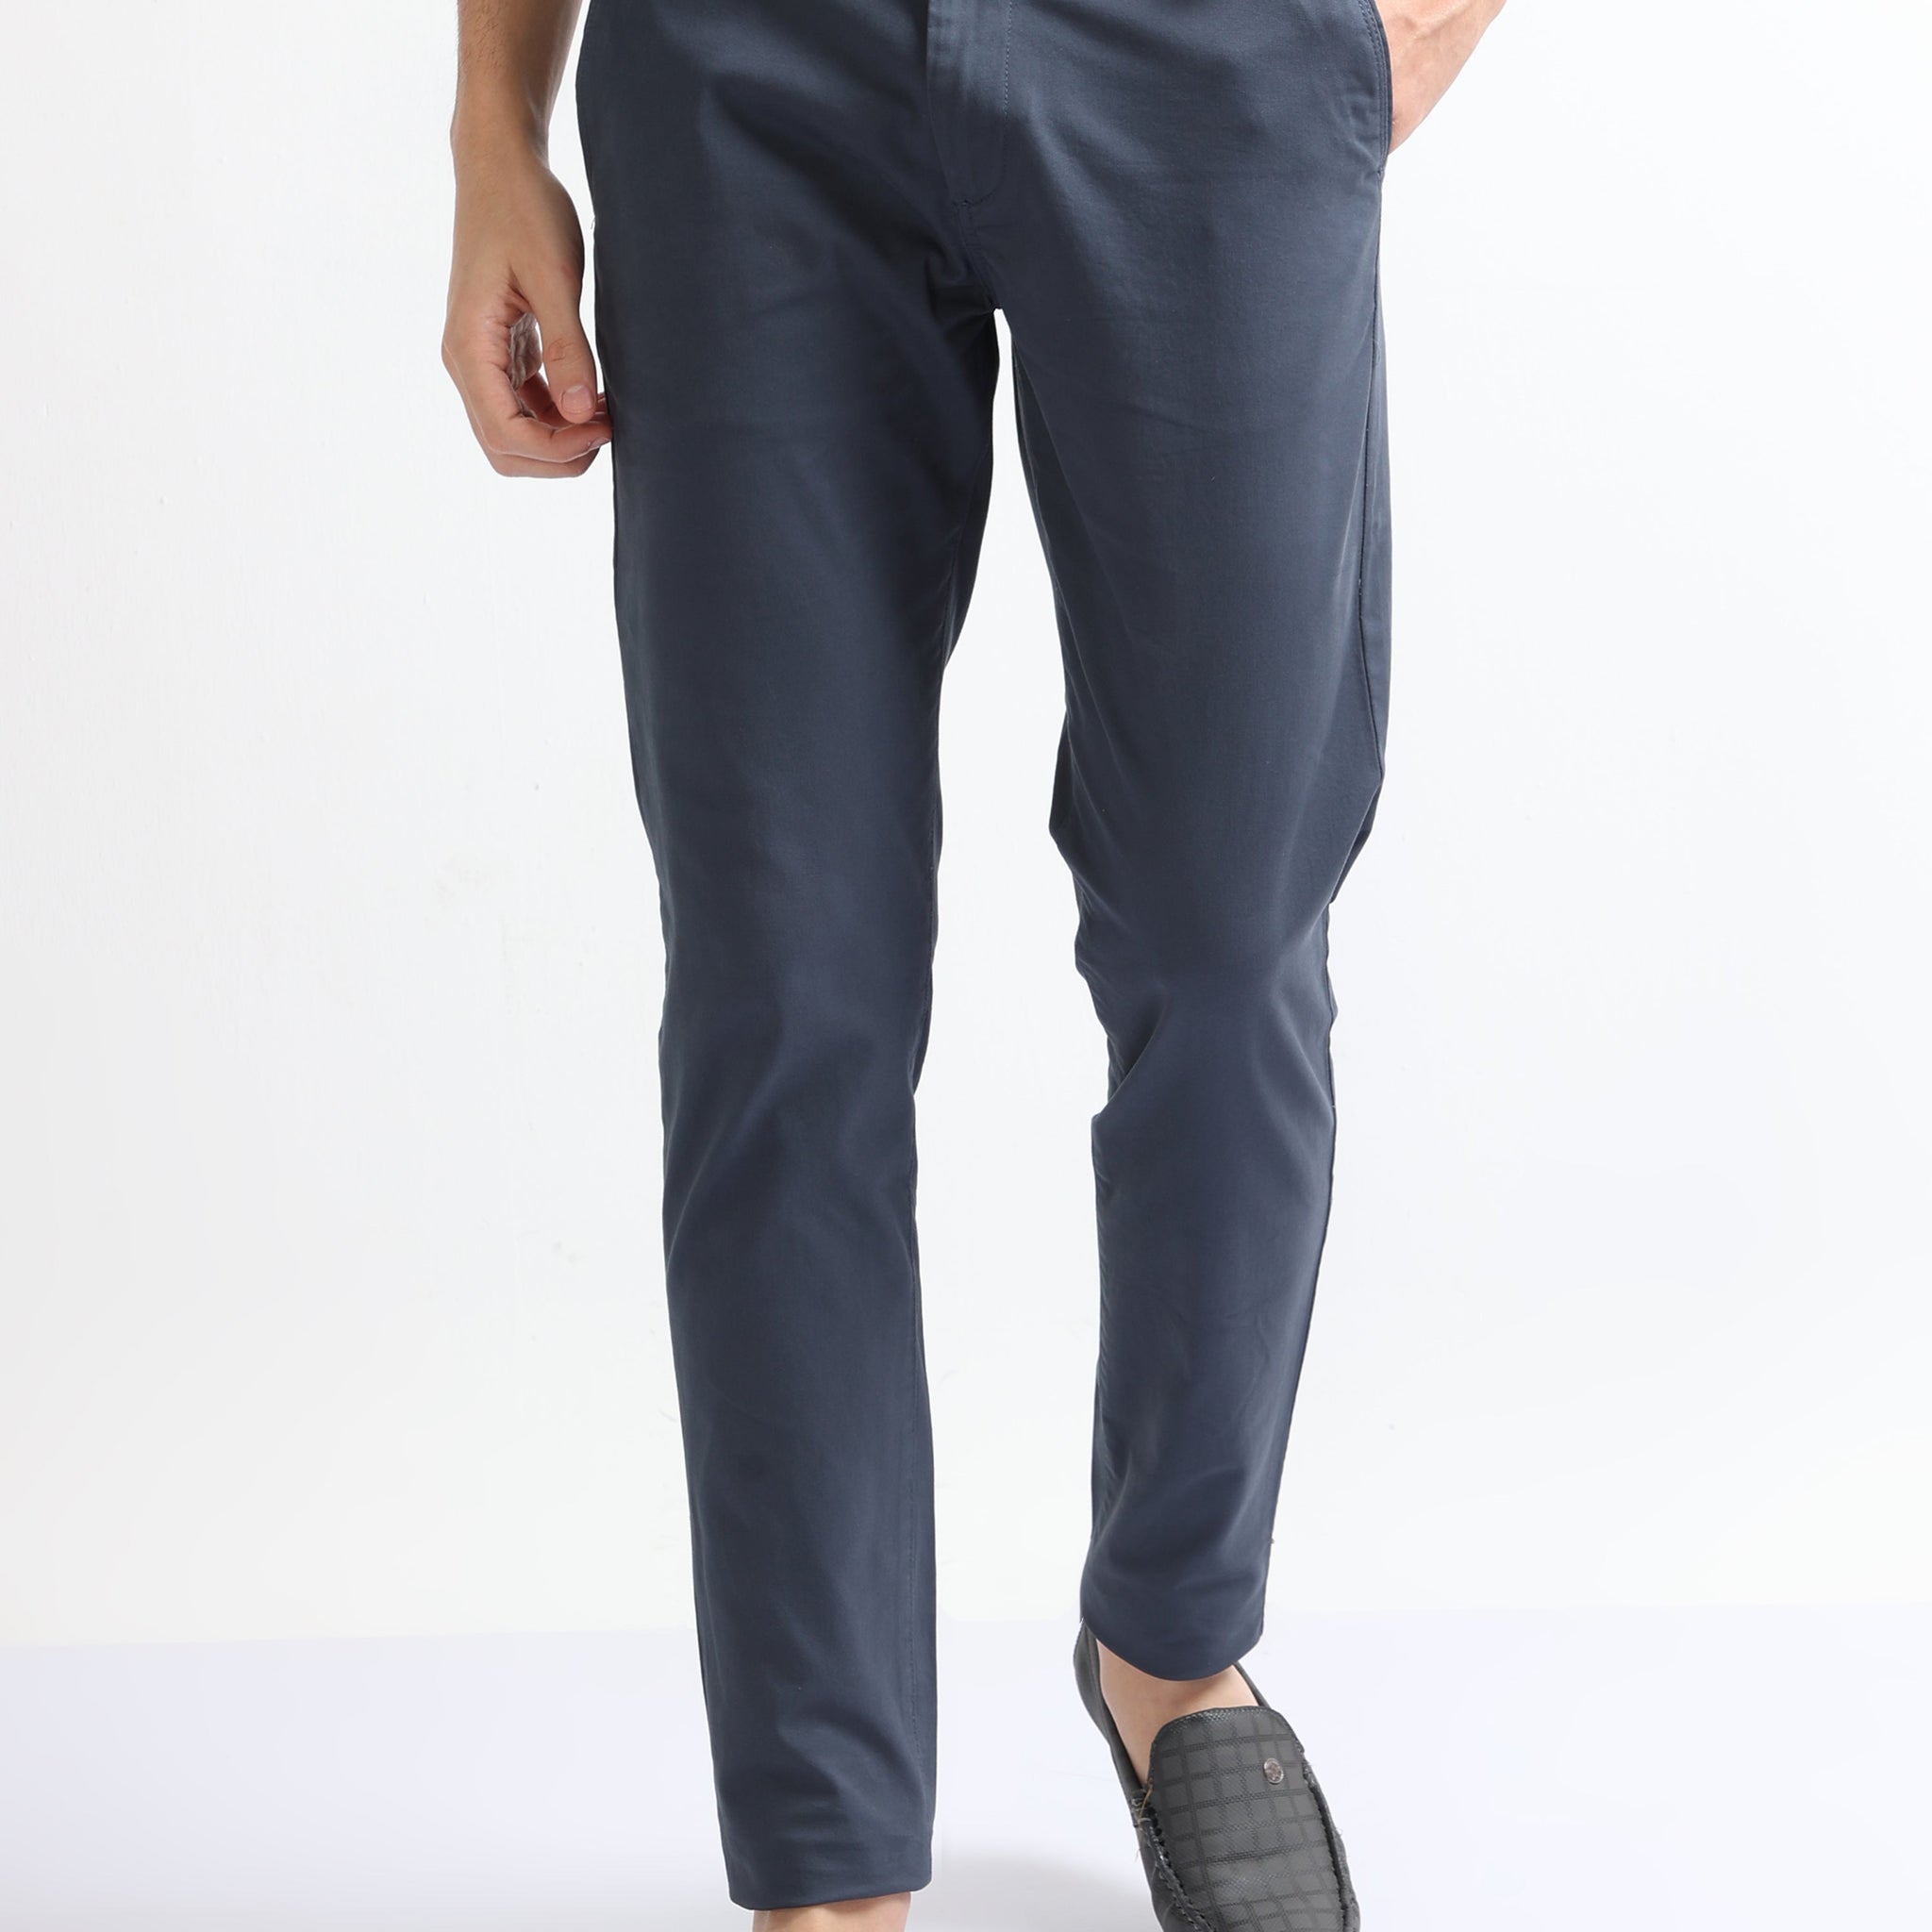 Buy Cotton Twill Stretch Trousers Online.